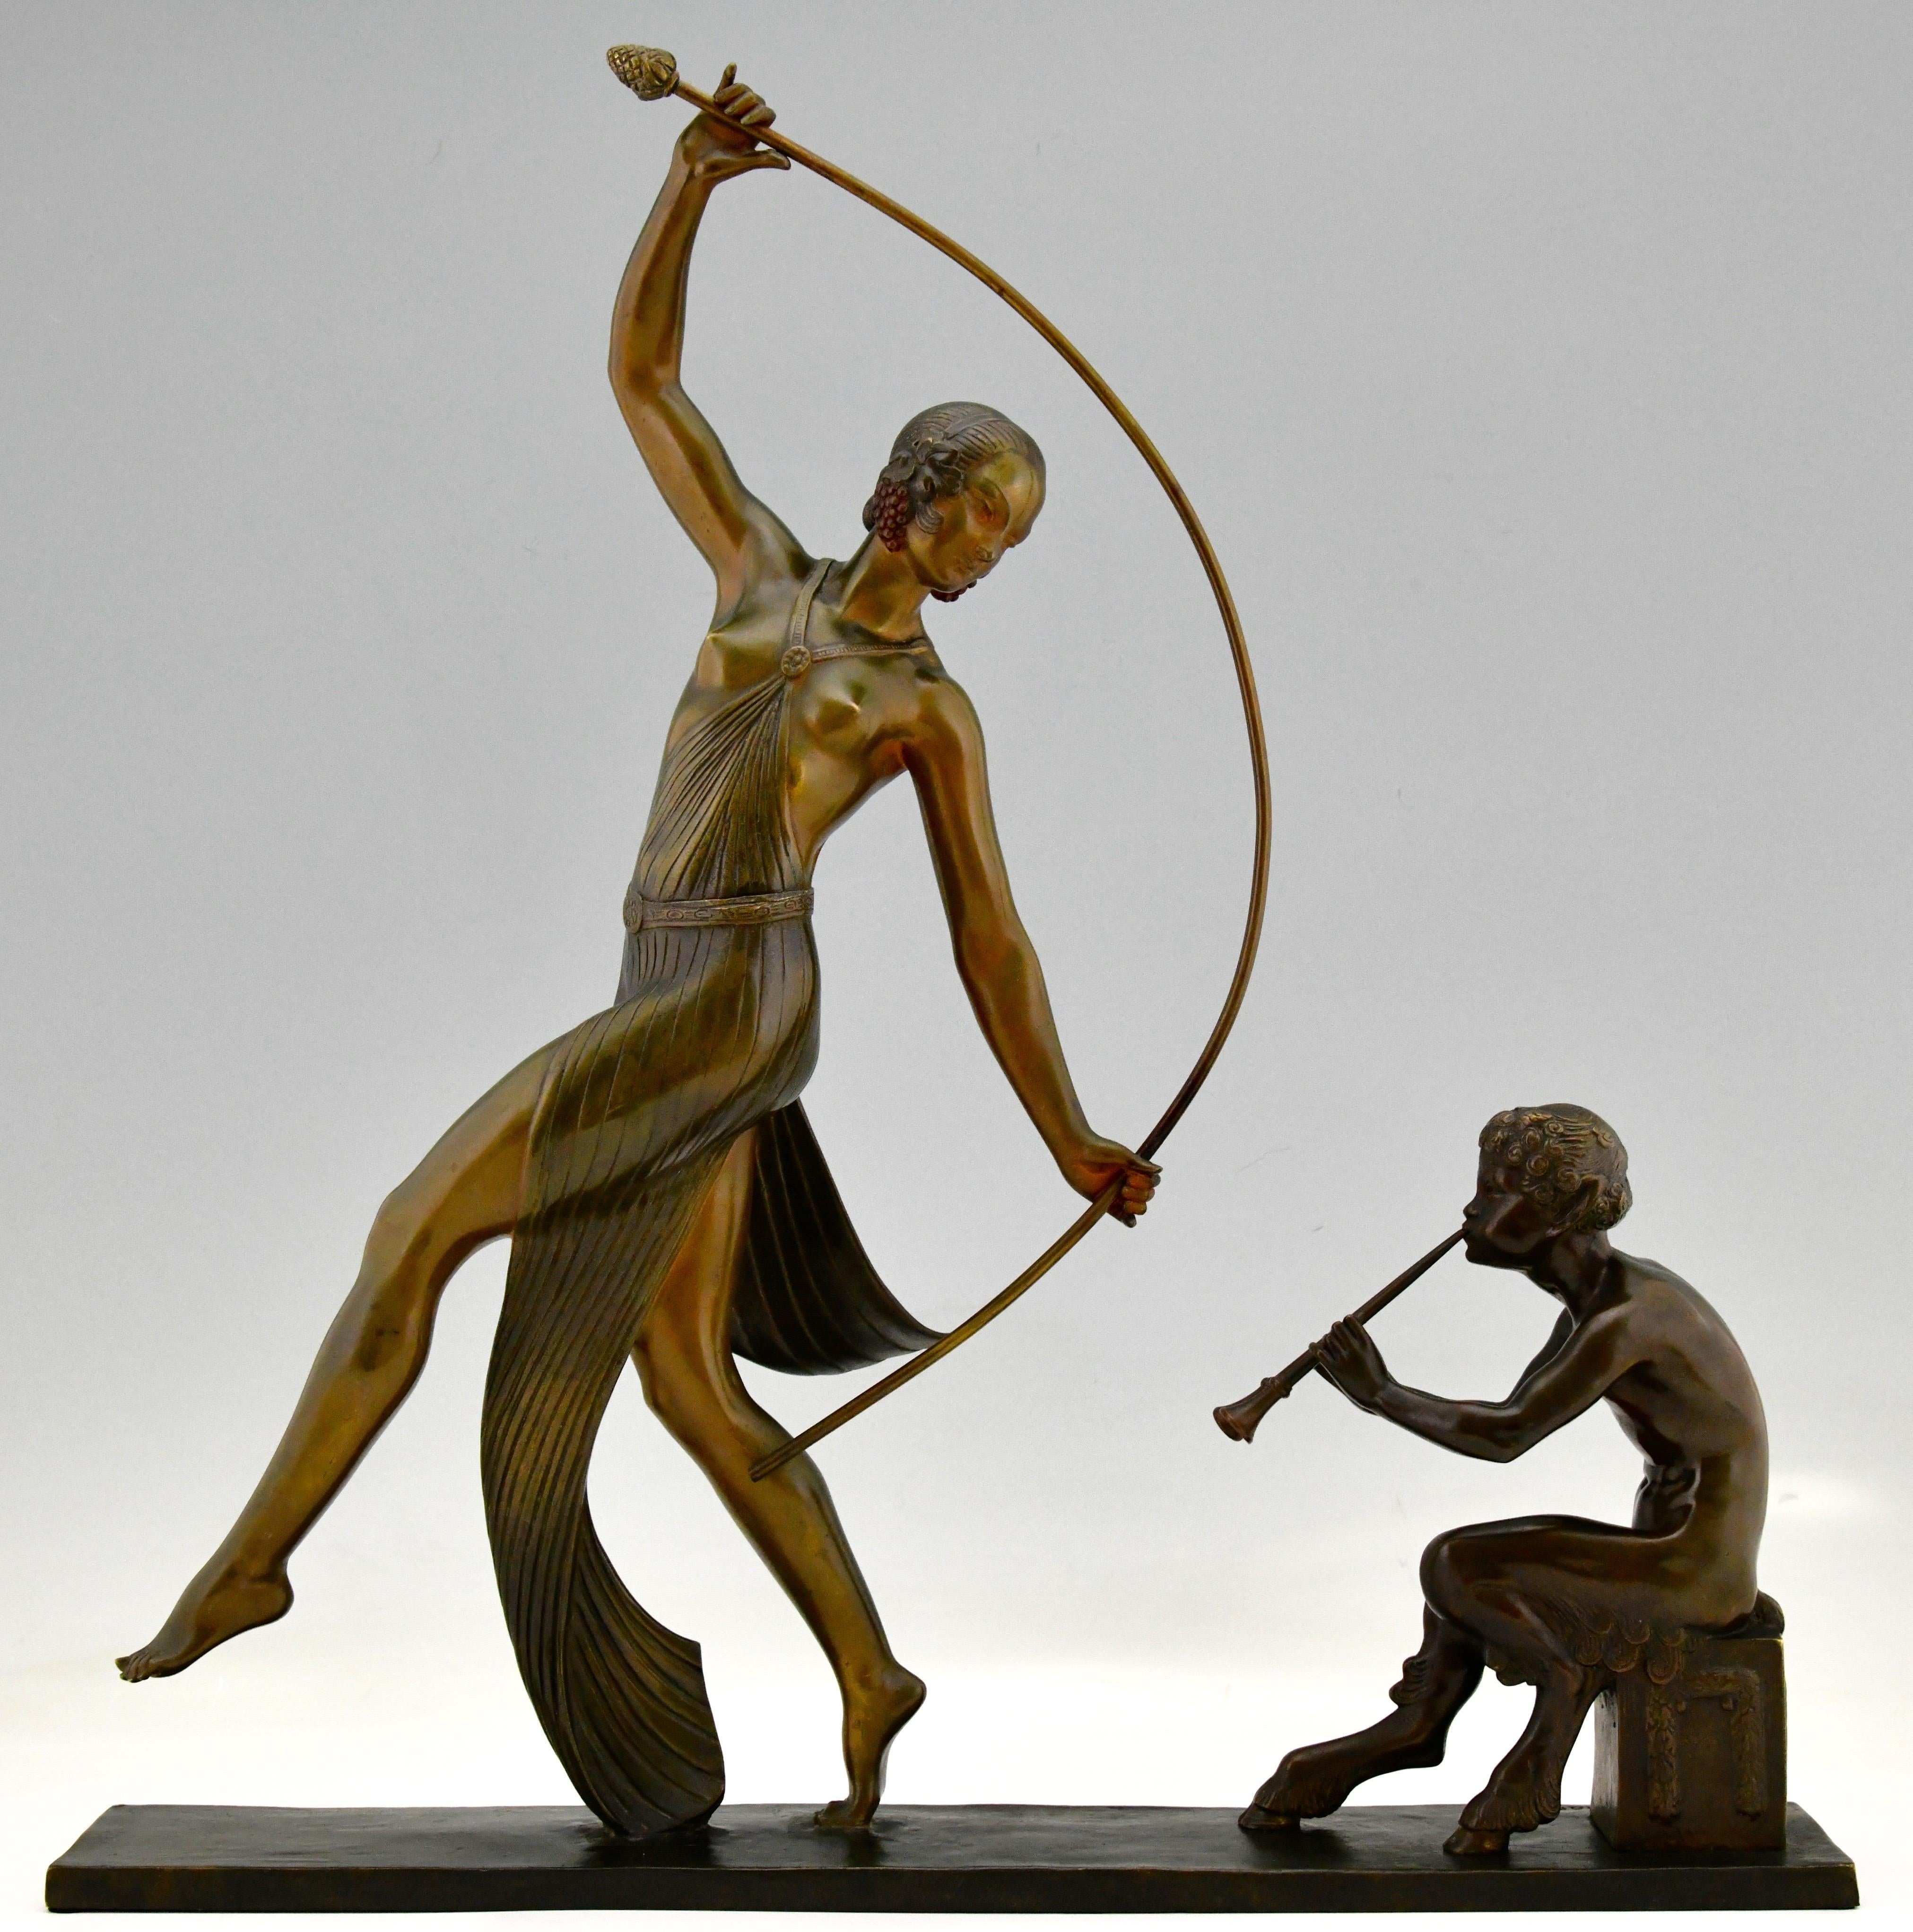 Art Deco bronze sculpture of a Thyrse dancer with faun playing flute signed by JD Guirande, pseudonym of Joe Descomps. Patinated bronze. France 1930.